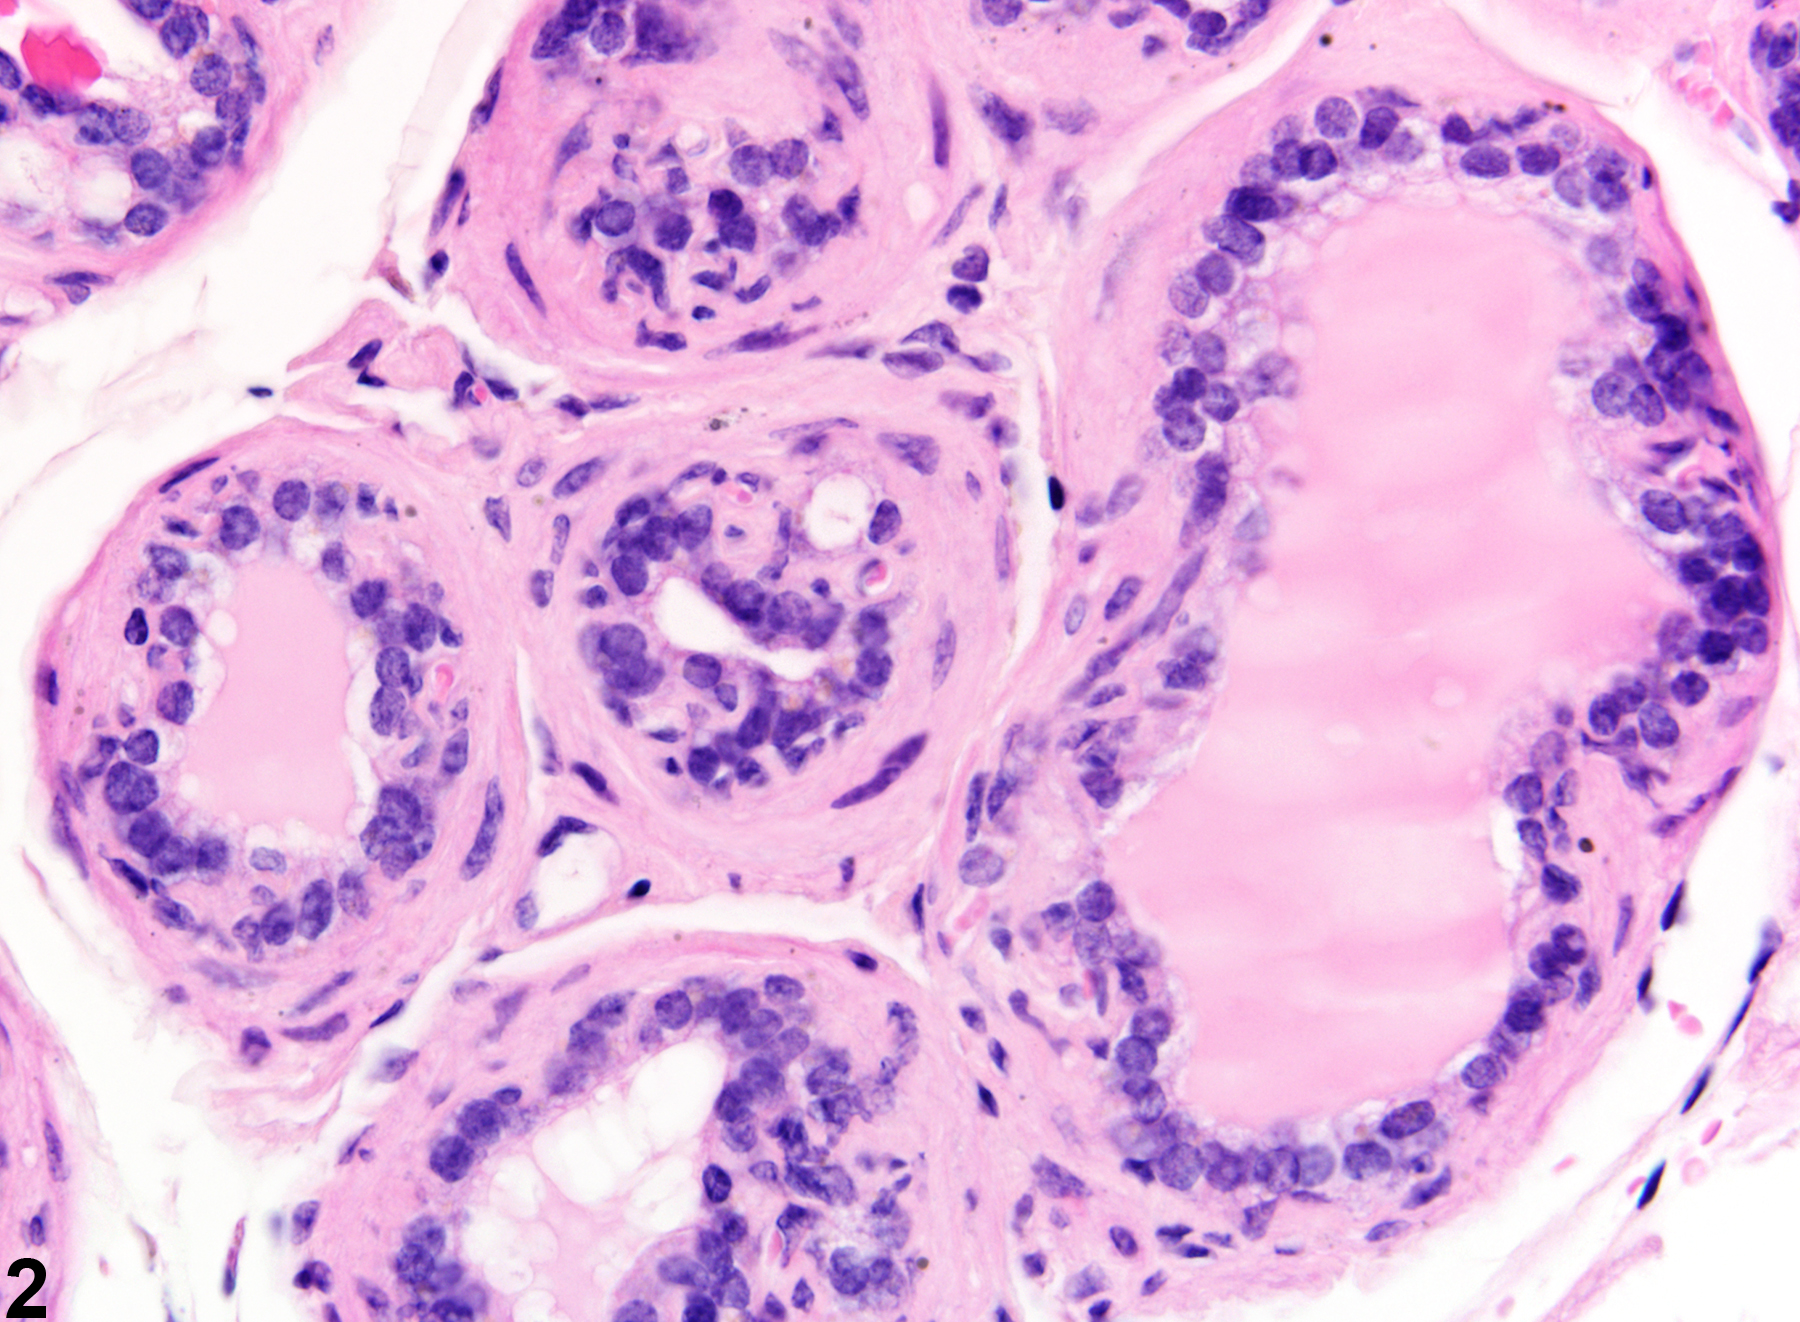 Image of atrophy in the coagulating gland from a male B6C3F1 mouse in a chronic study